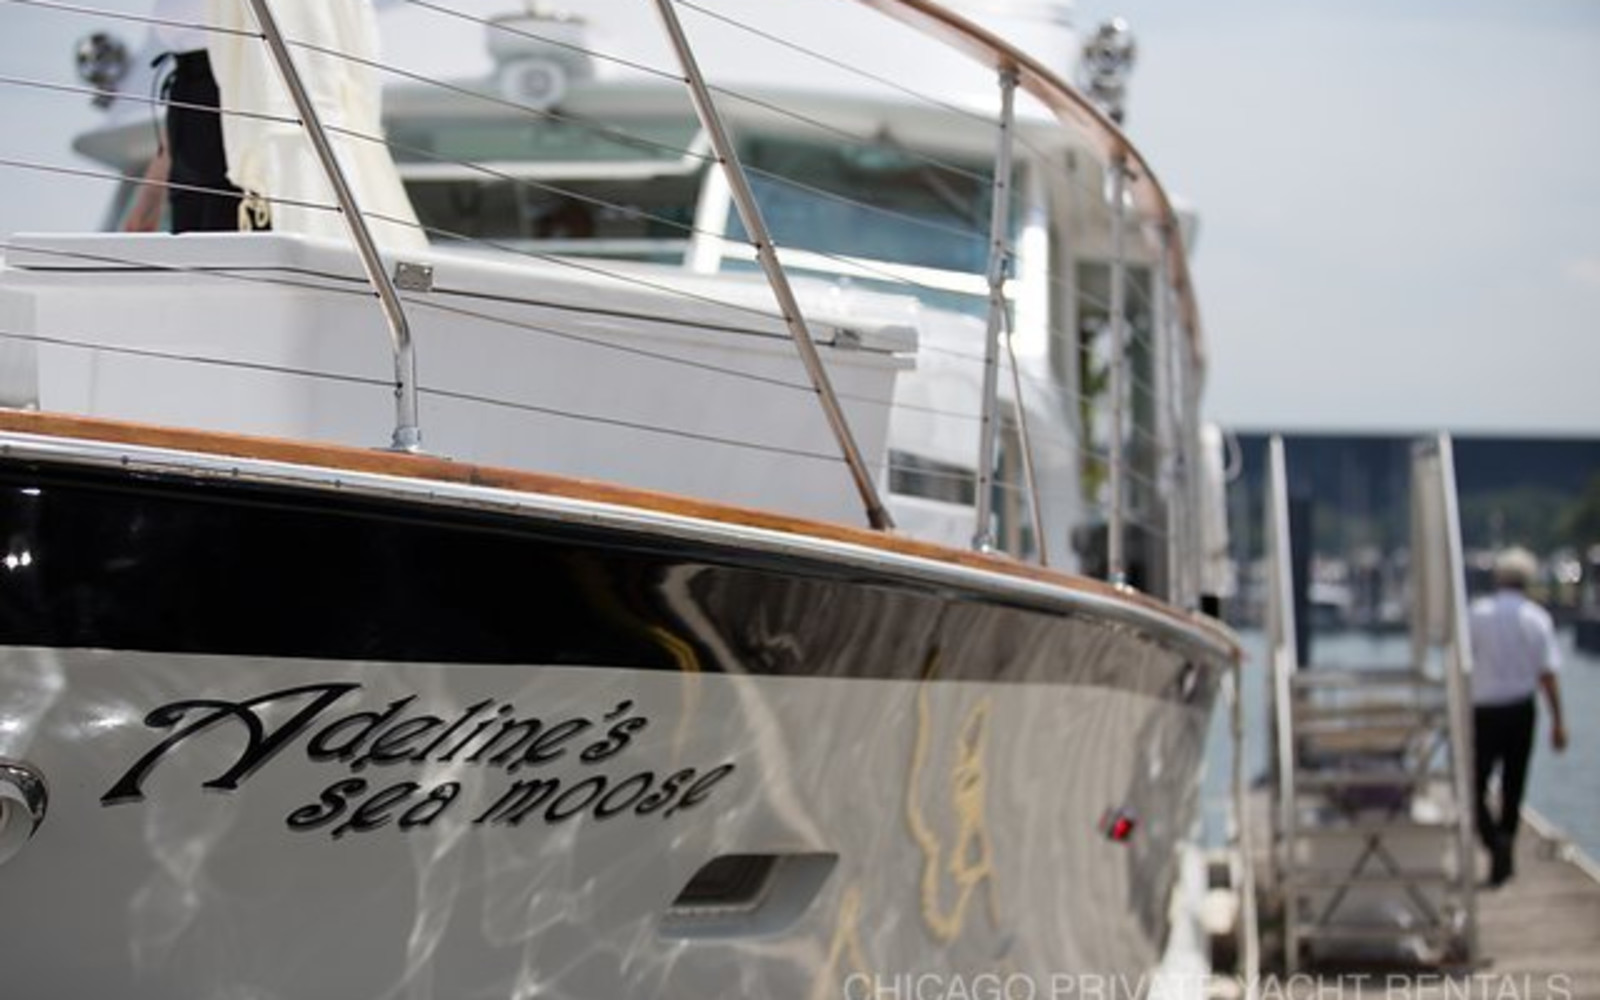 Adeline’s Sea Moose – Chicago Private Yacht